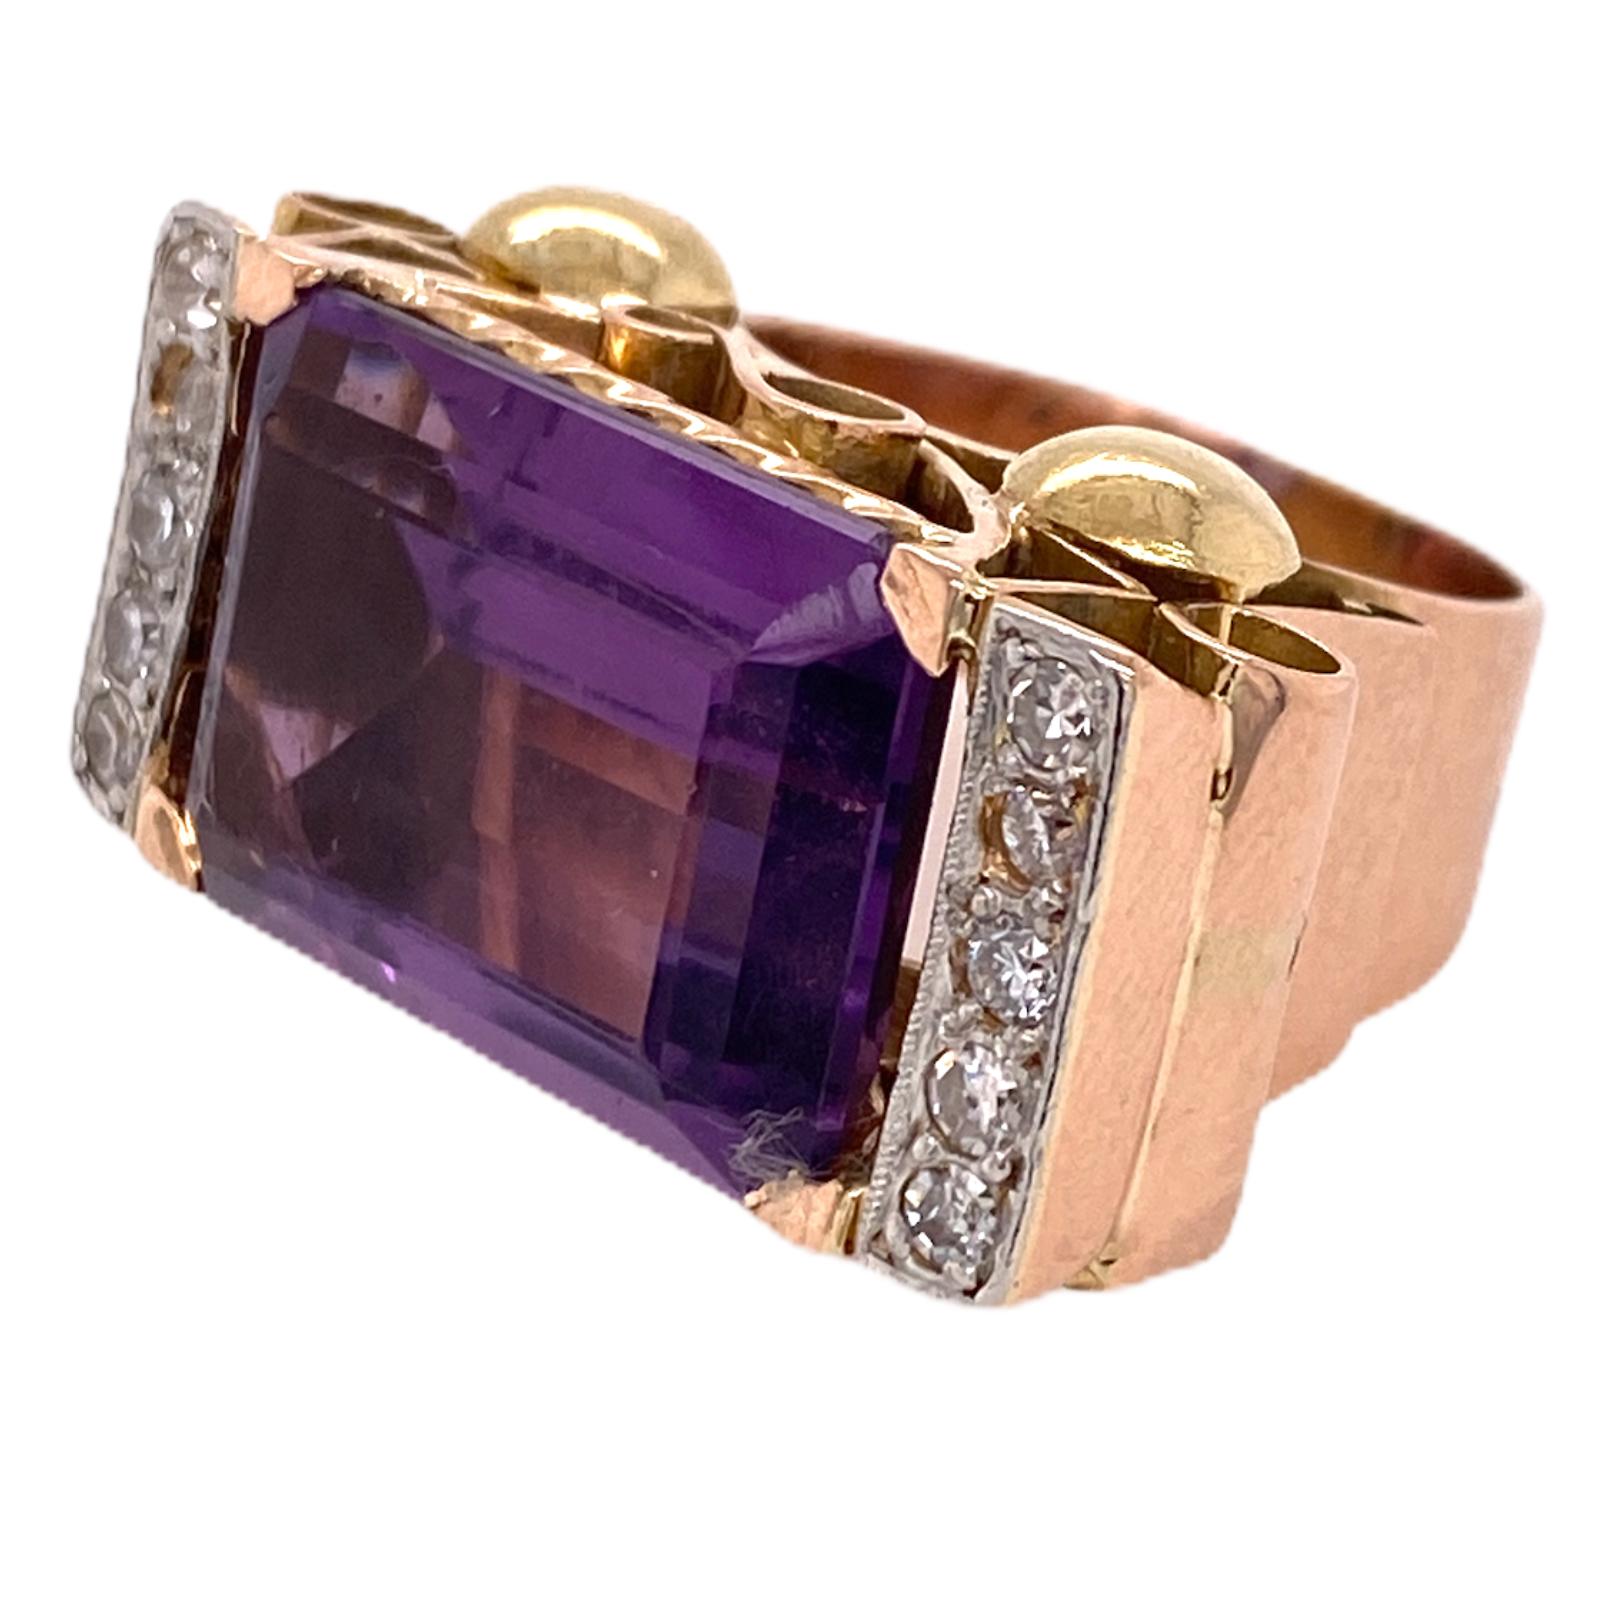 Fabulous Retro amethyst and diamond ring fashioned in 18 karat rose and yellow gold.  The emerald cut amethyst weighs approximately 14 carats and measures 13 x 19.5 mm. The amethyst is flanked by 10 single cut diamonds weighing .50 carat total